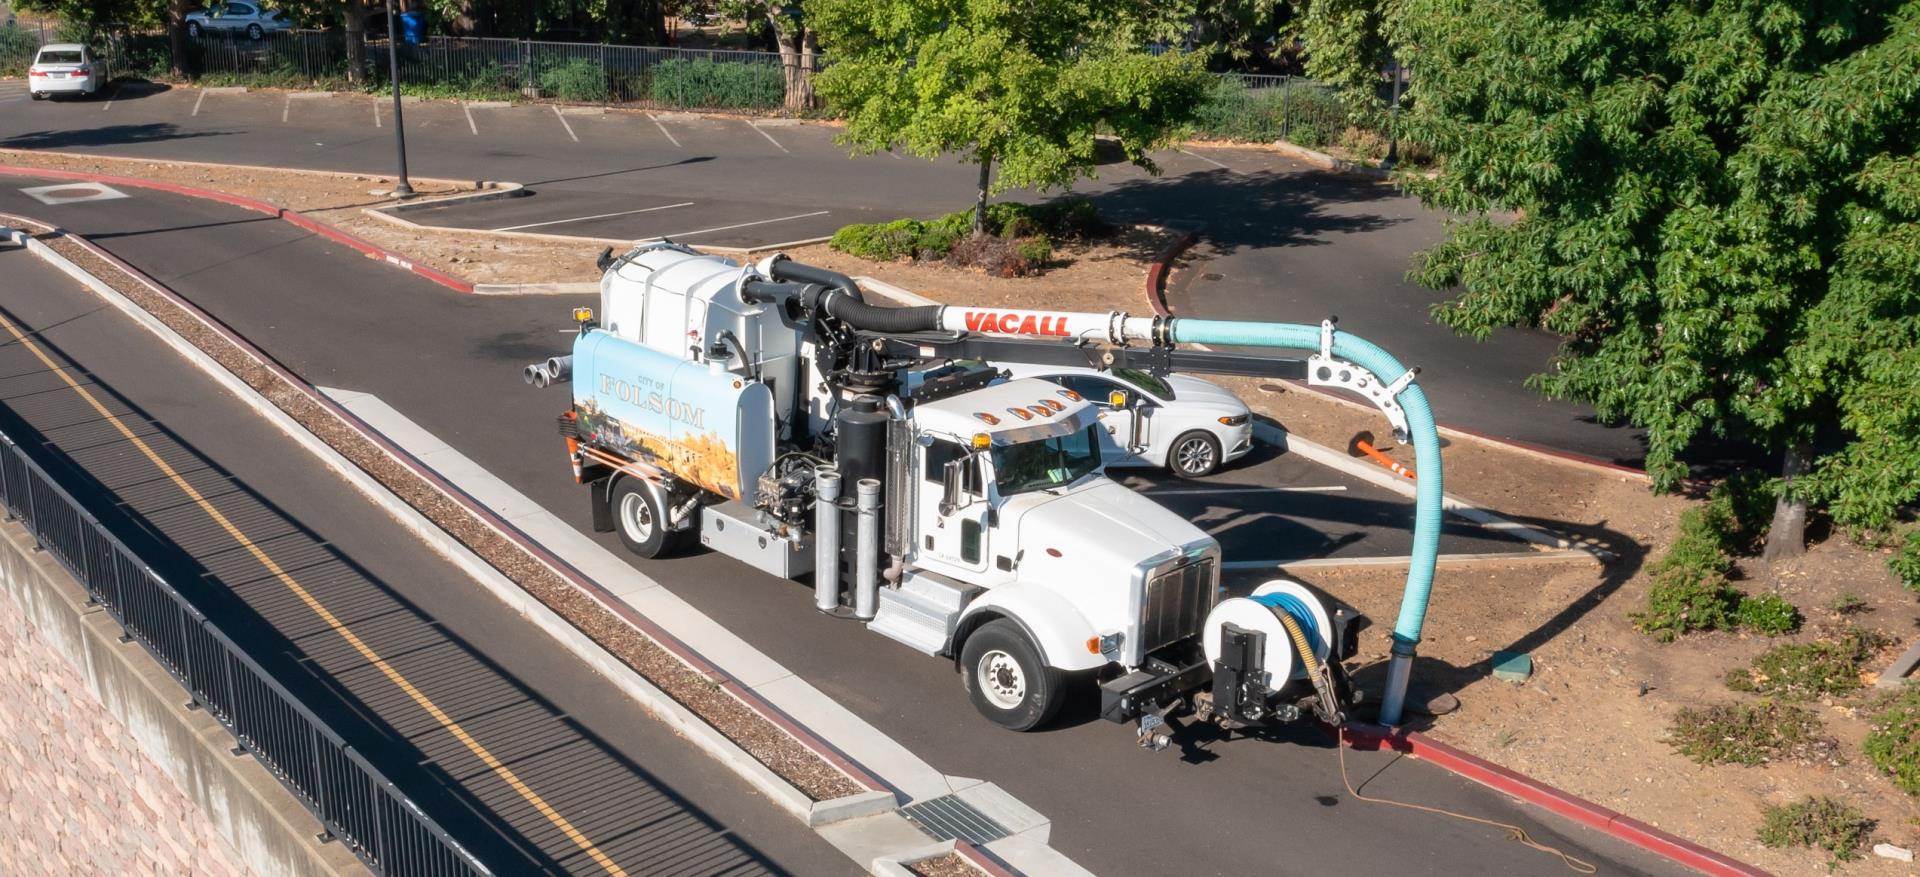 Vactor Truck in a parking lot